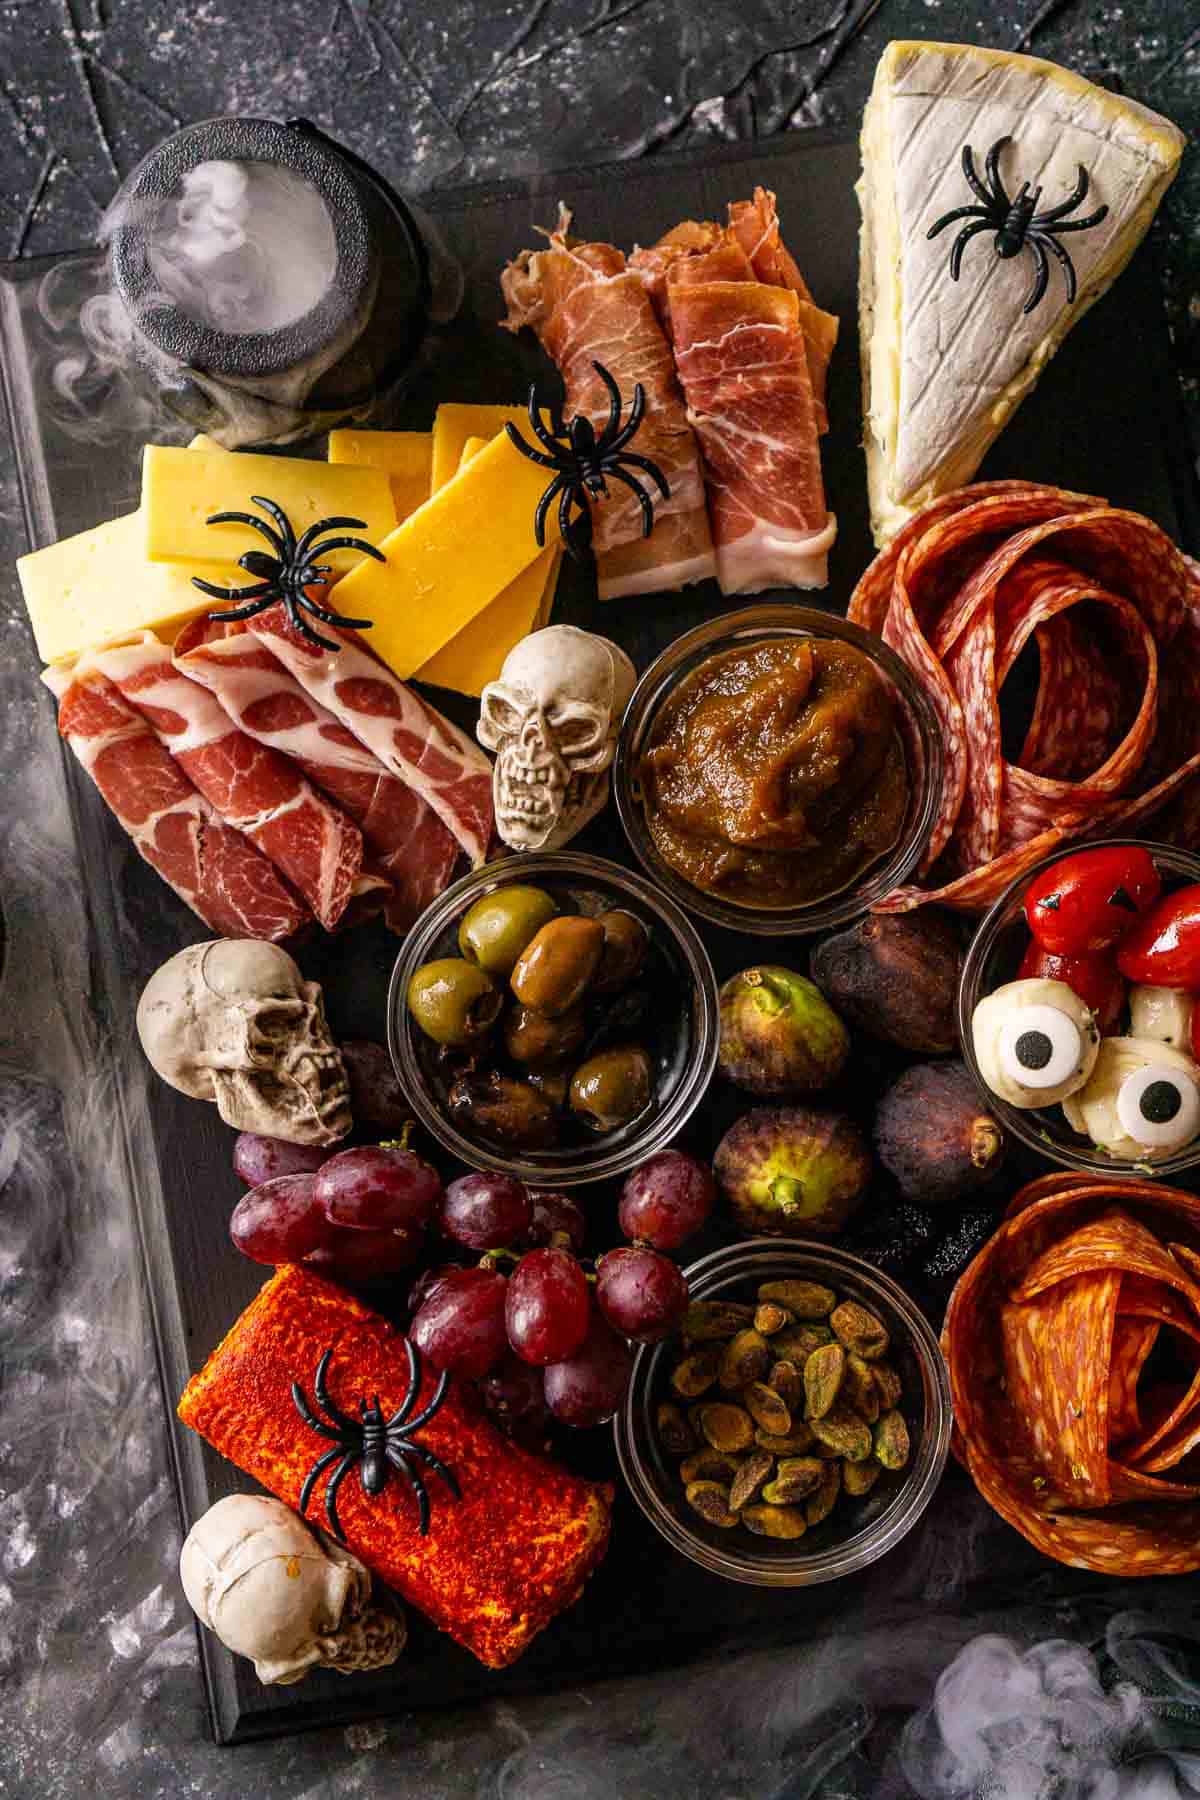 The Halloween charcuterie board on a black and white textured surface with a spooky mist coming in on the sides from dry ice.